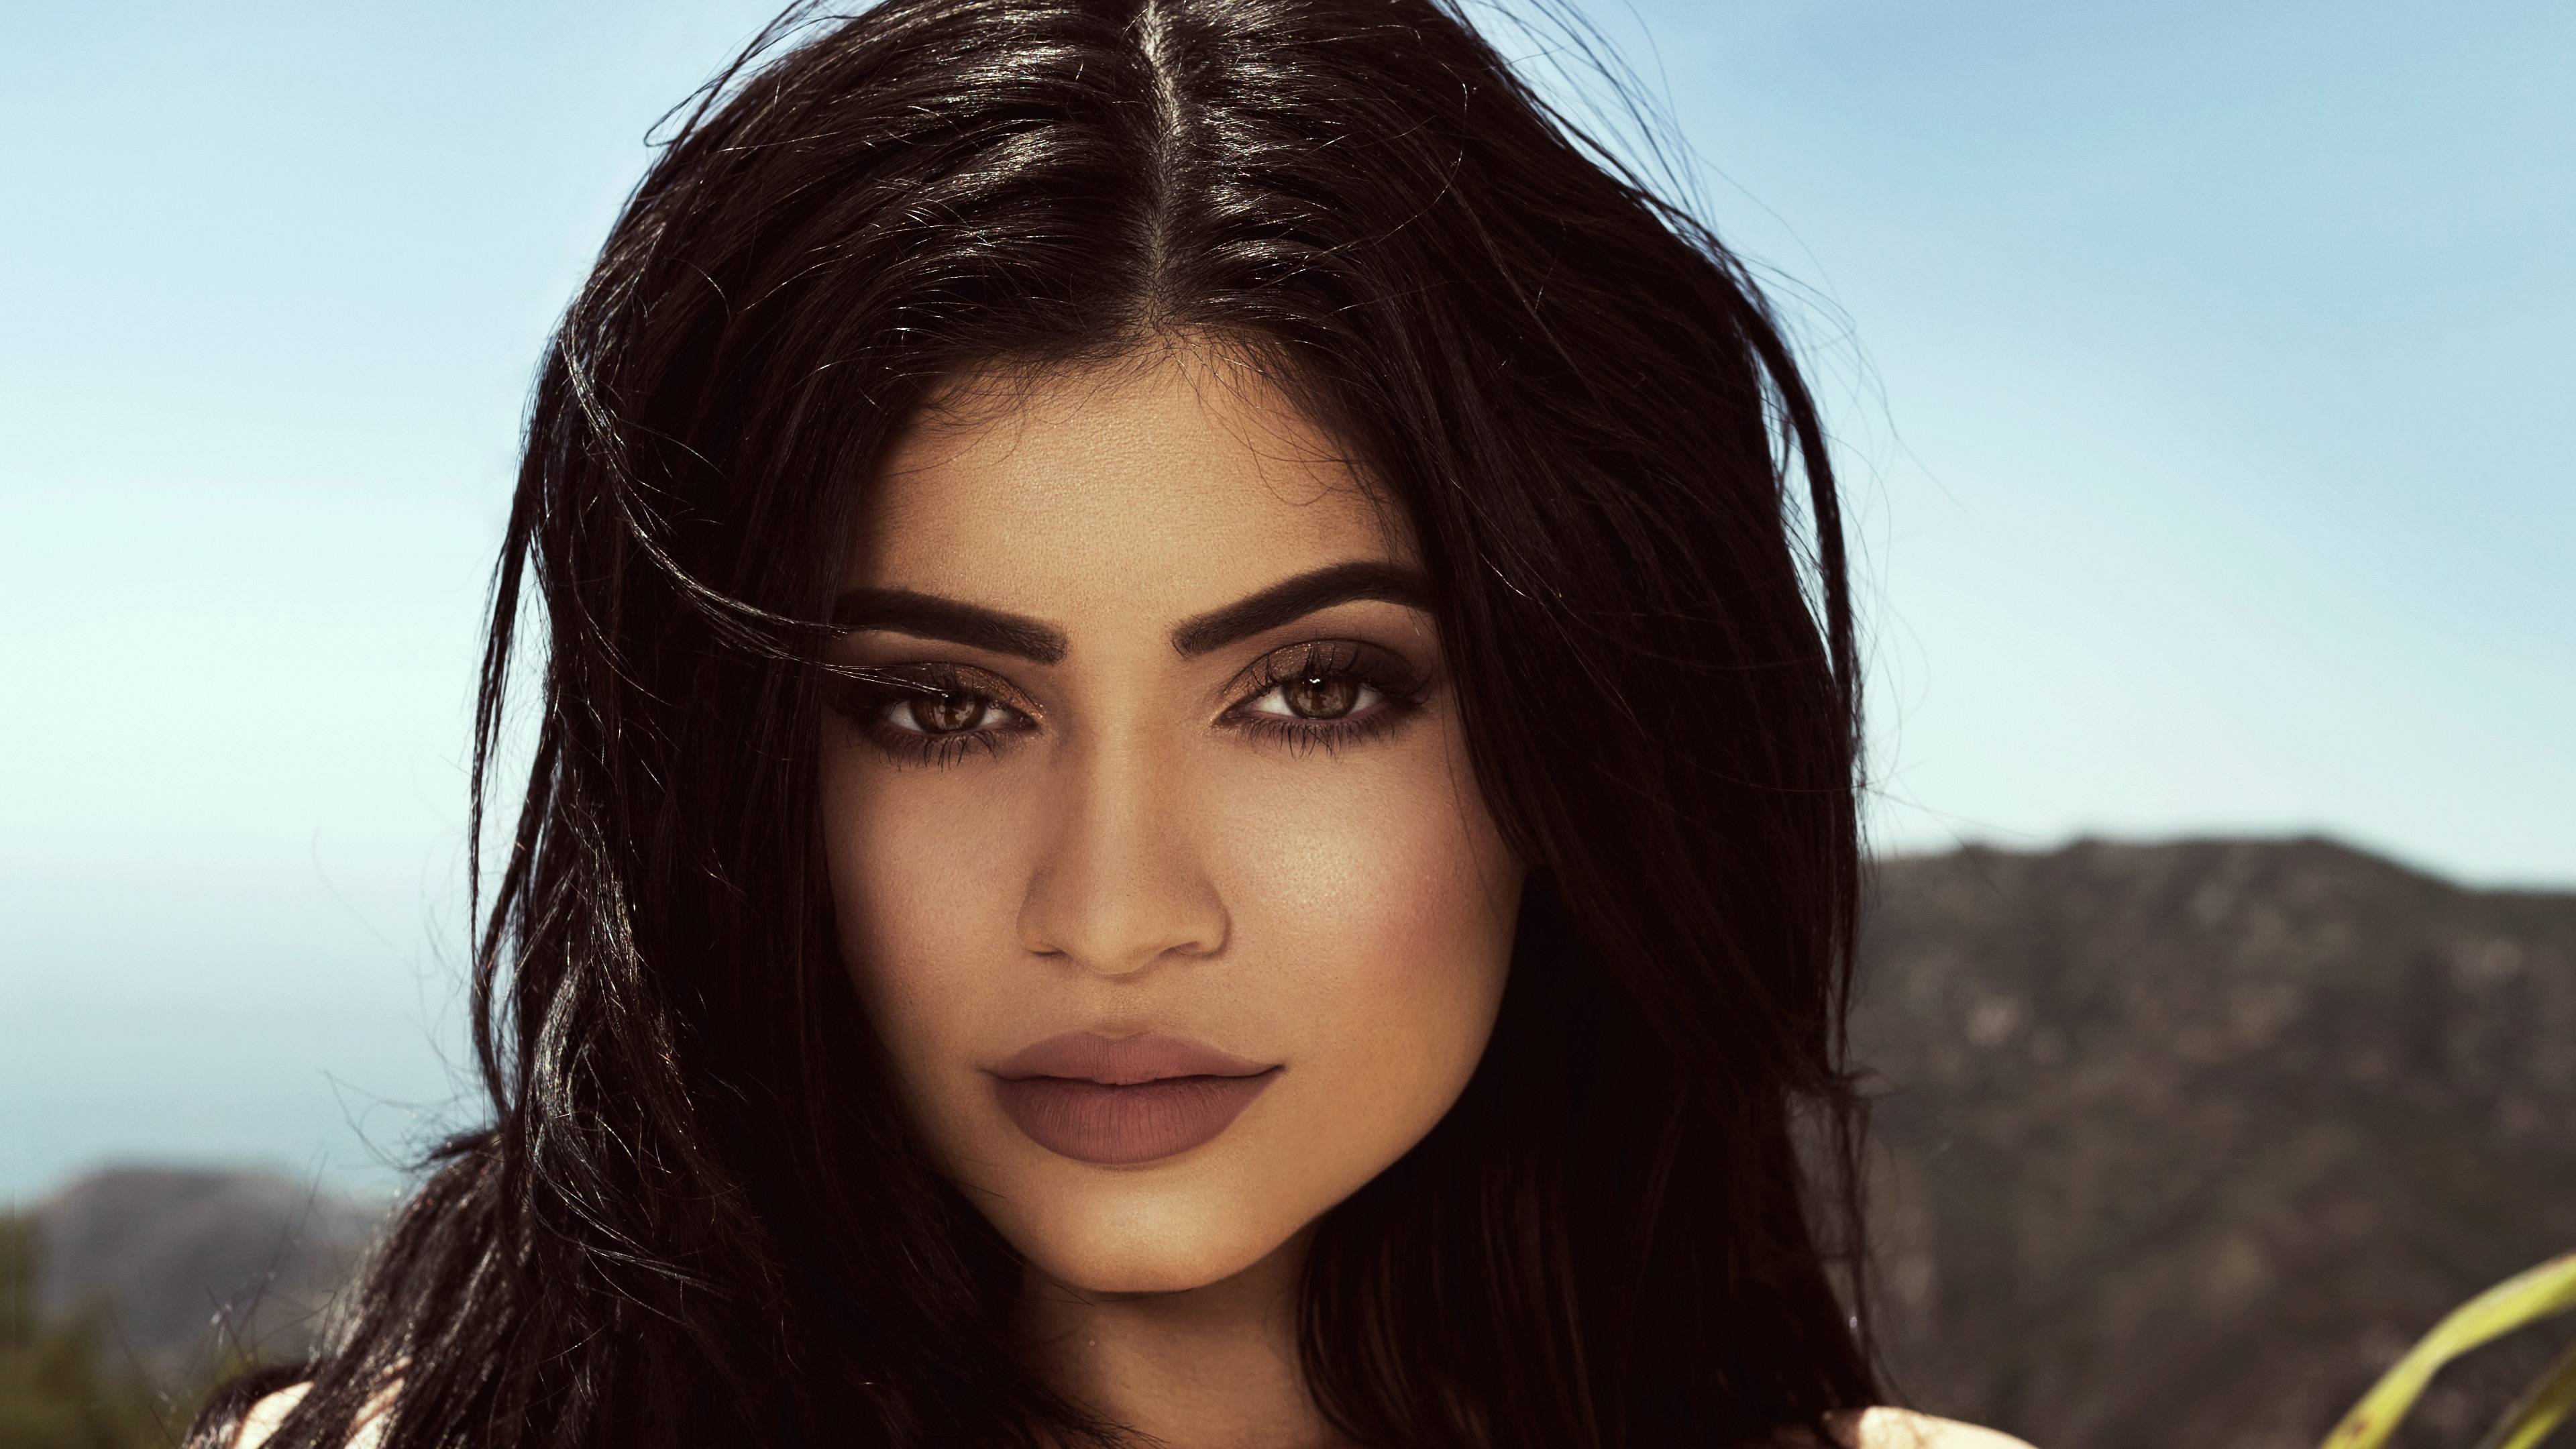 Kylie jenner hd wallpapers